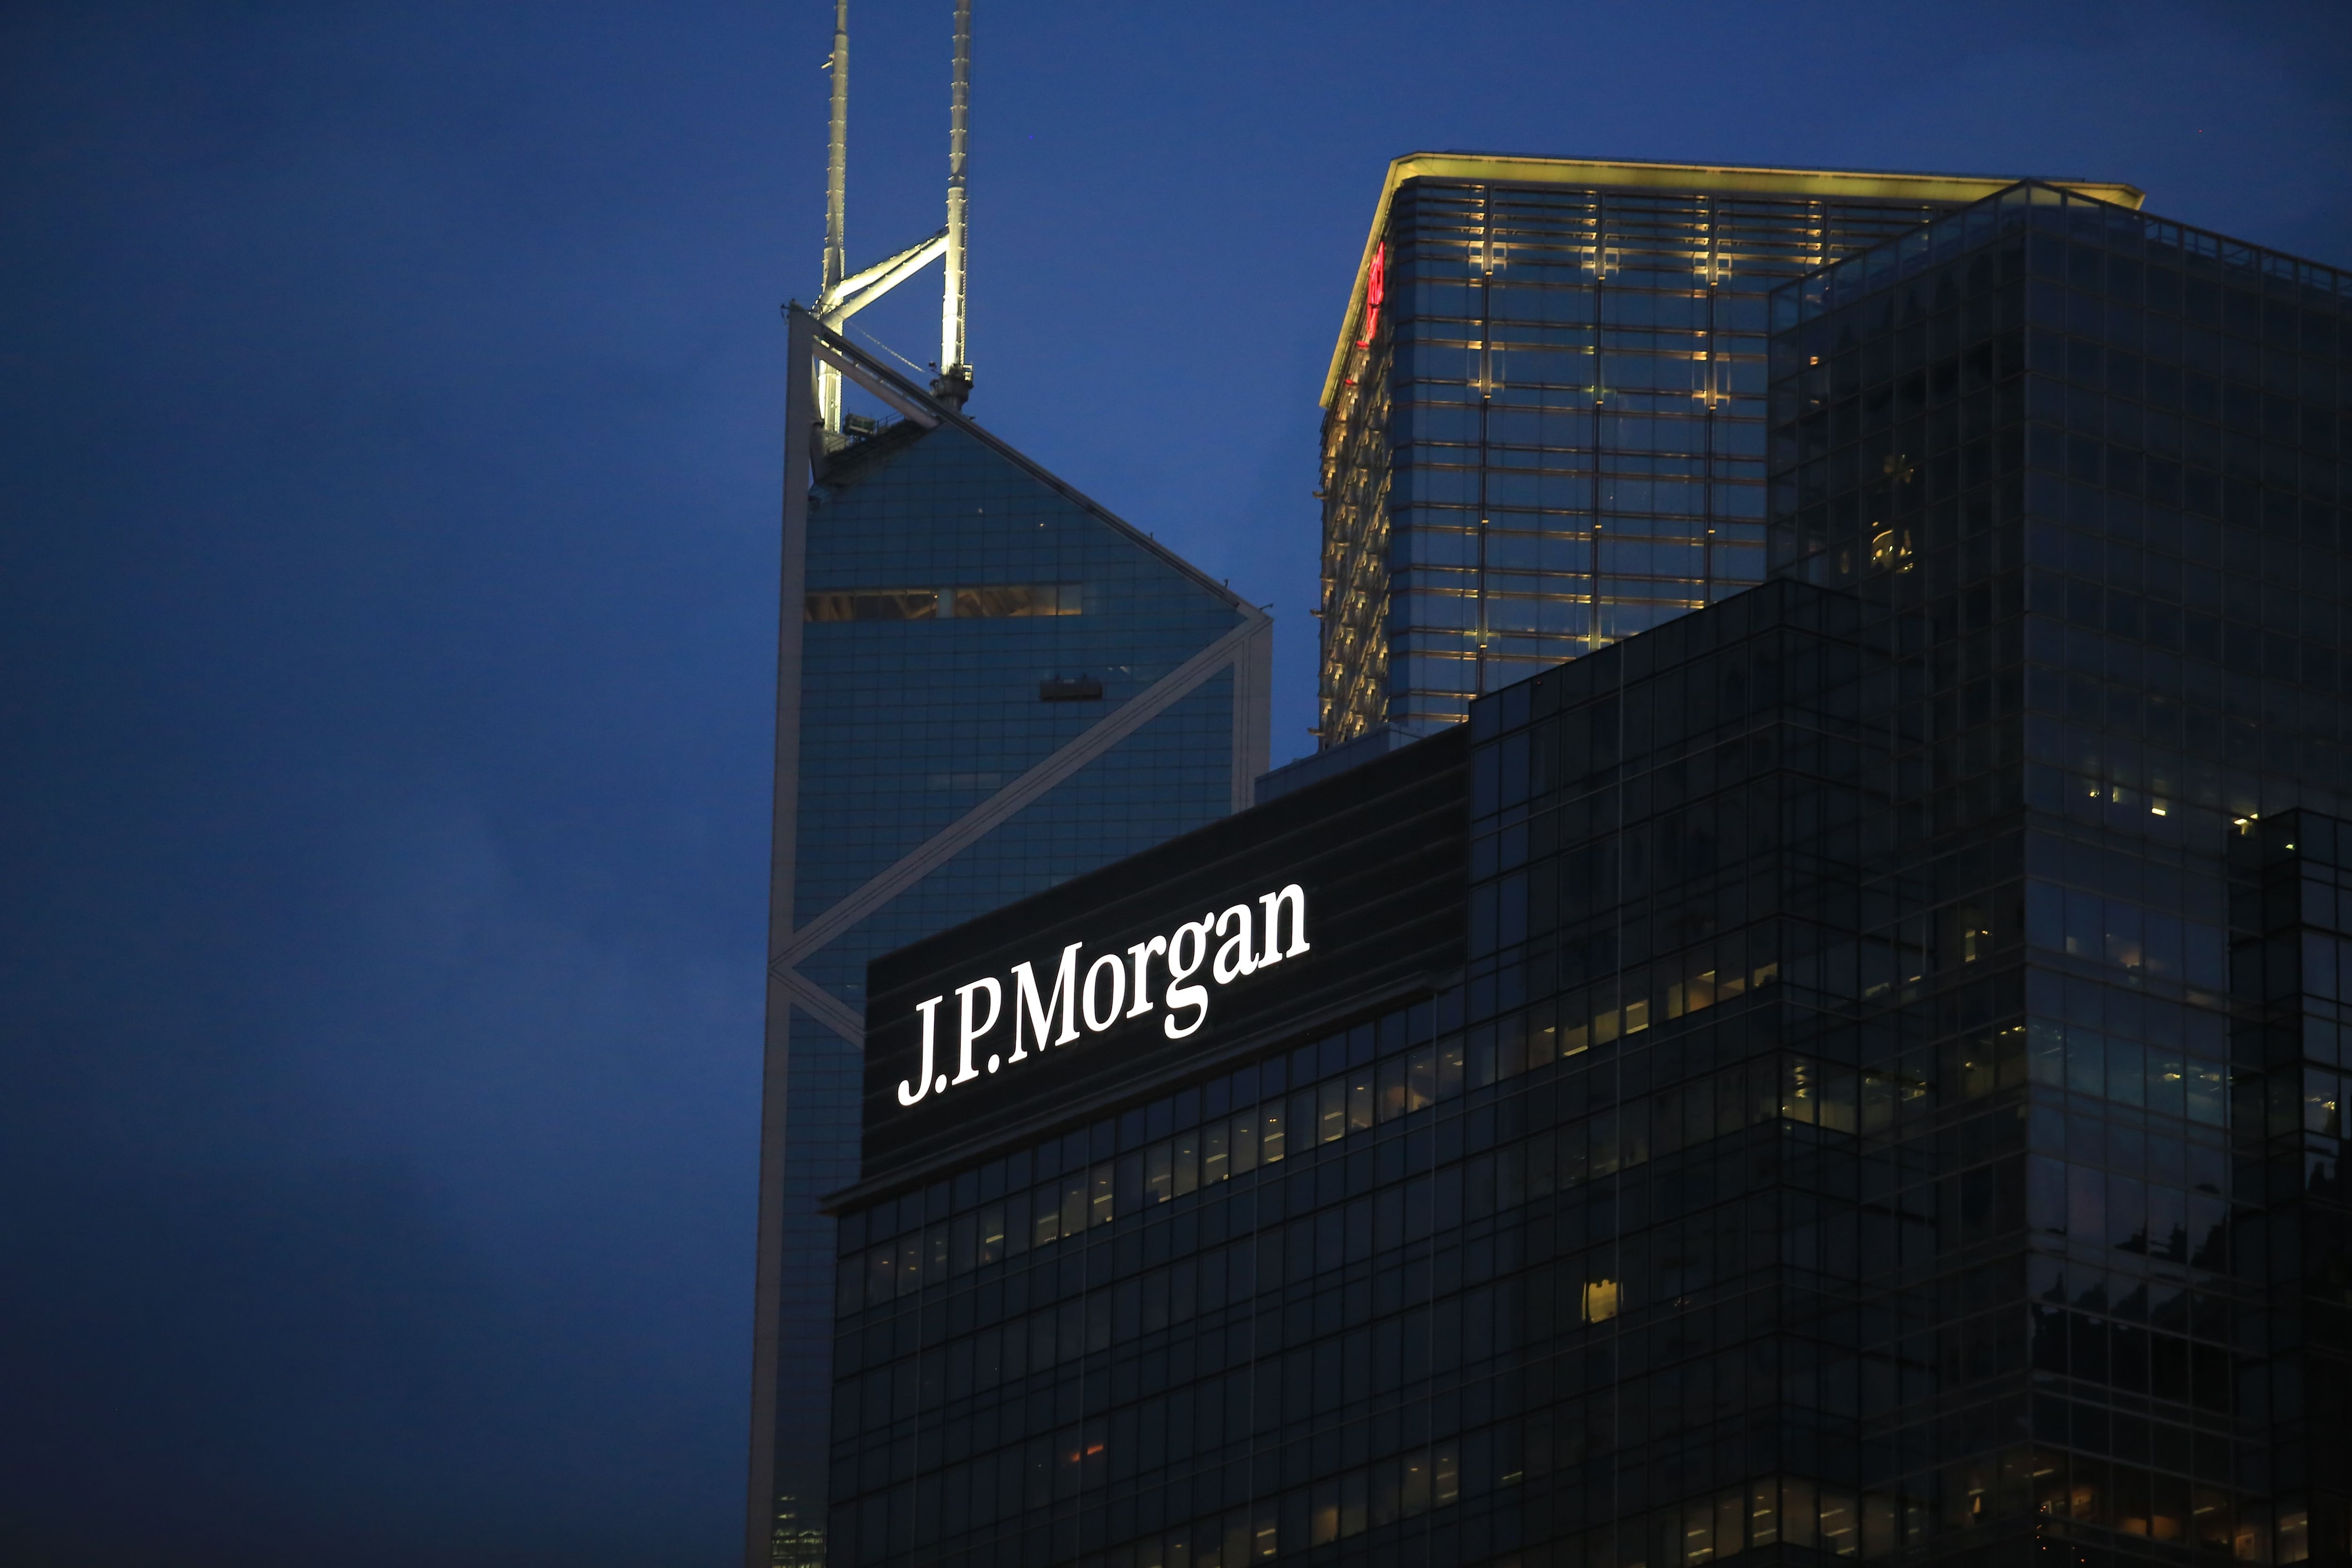 This is why JP Morgan’s Onyx CEO says public ledgers aren’t fit for large transactions